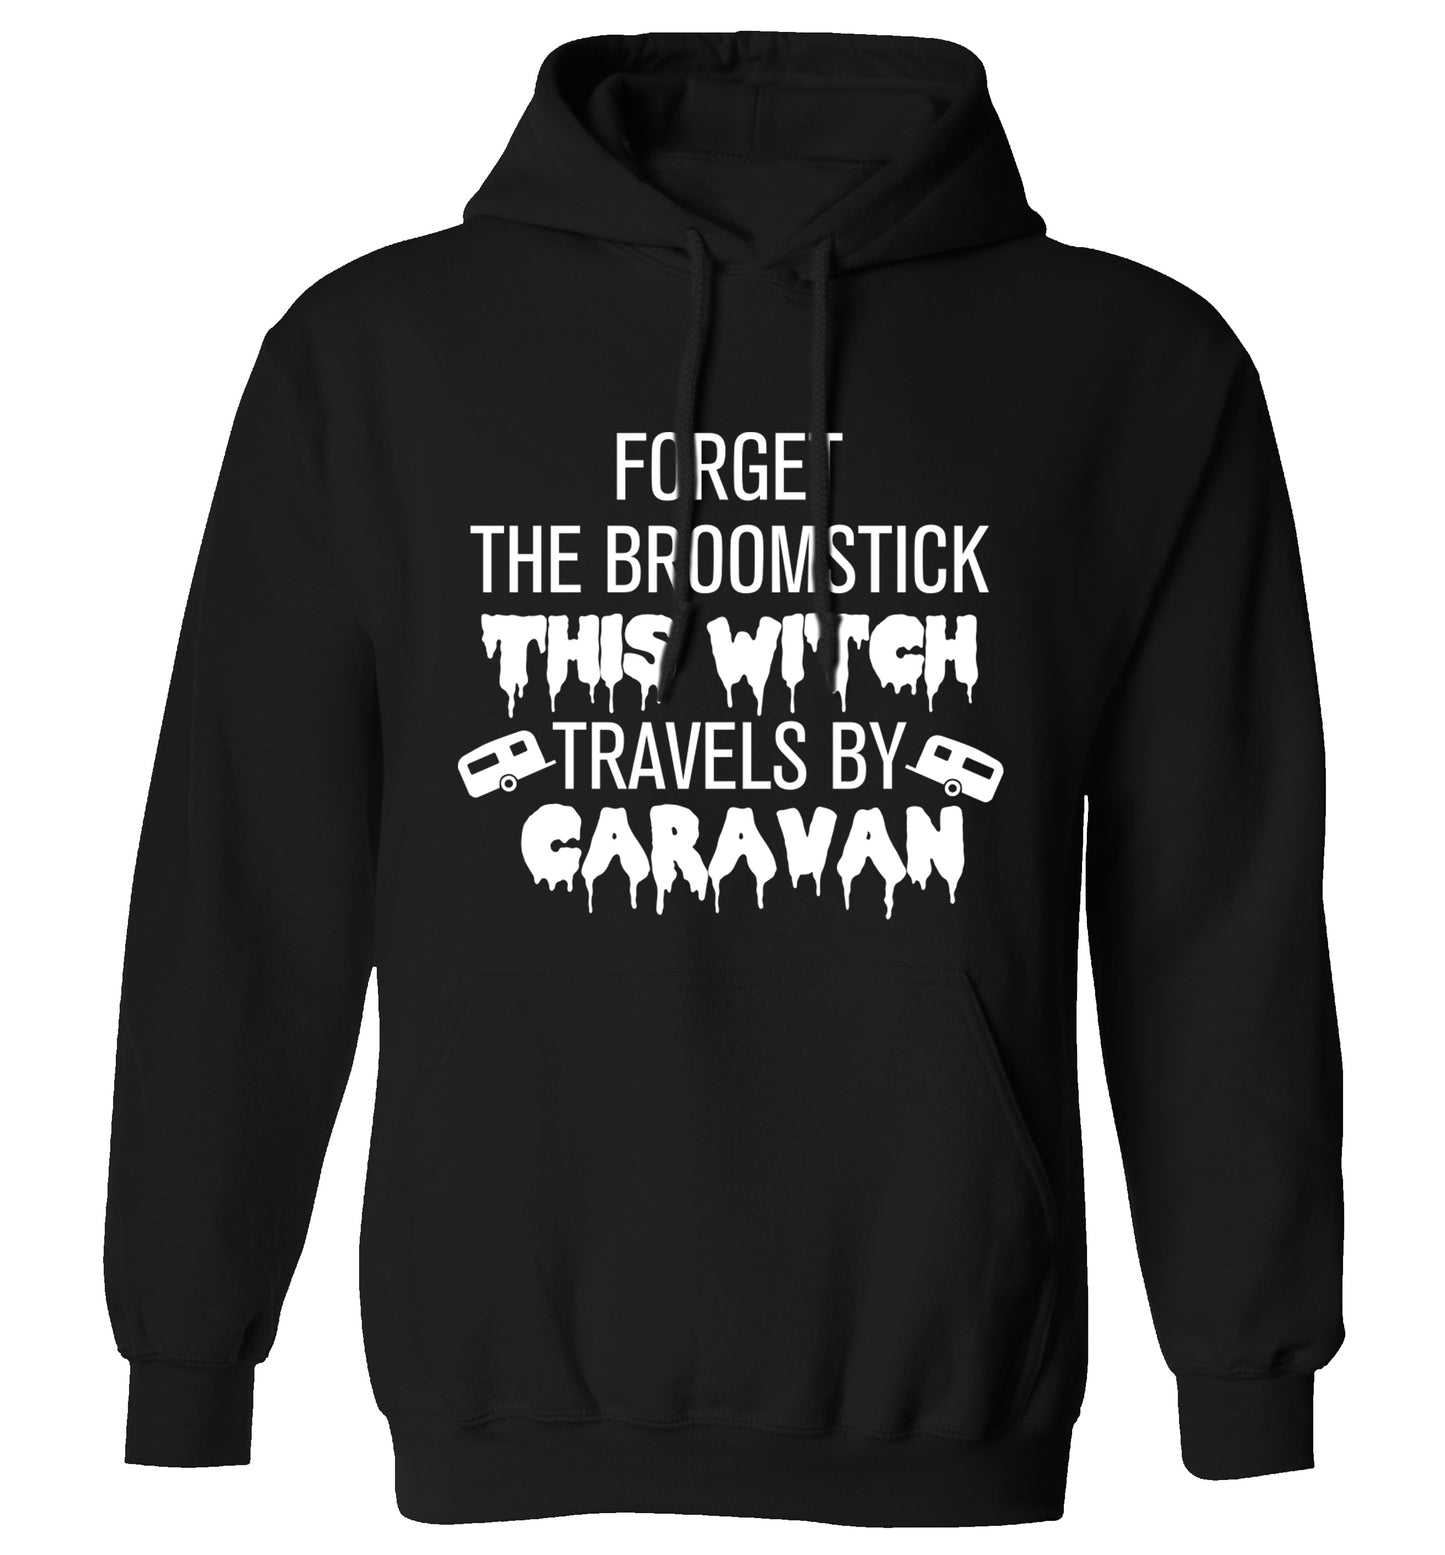 Forget the broomstick this witch travels by caravan adults unisexblack hoodie 2XL